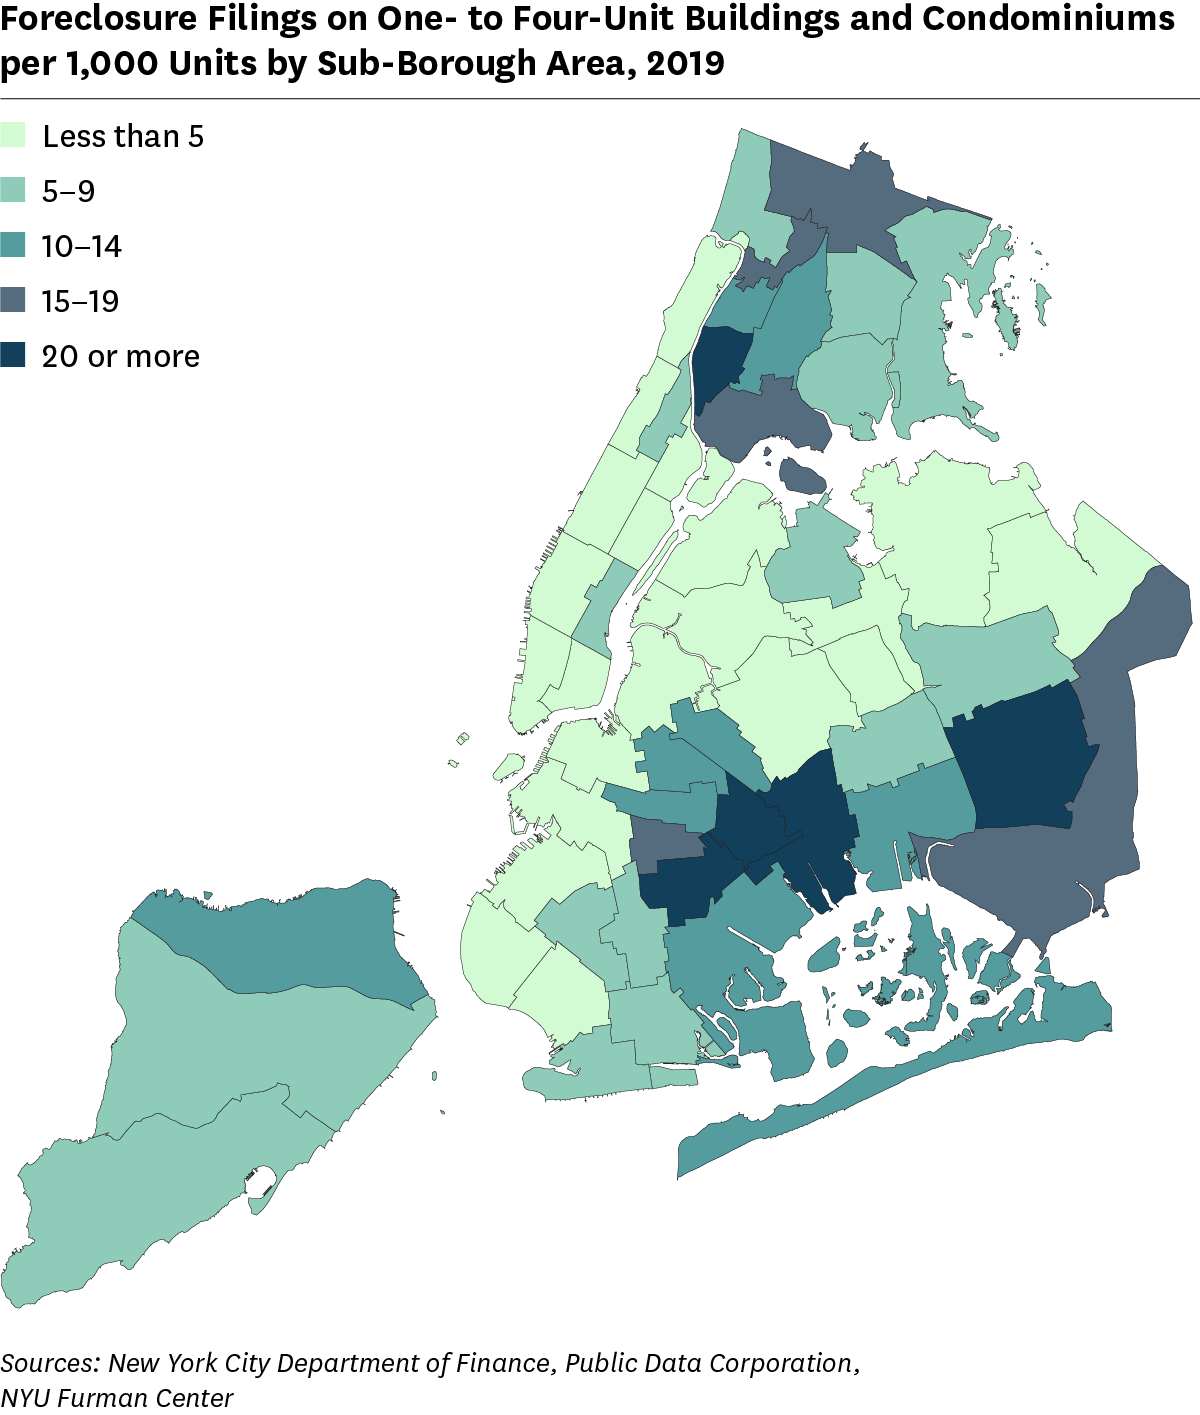 Map showing Foreclosure Filings on One- to Four-Unit Buildings and Condominiums per 1,000 Units by Sub-Borough Area, 2019